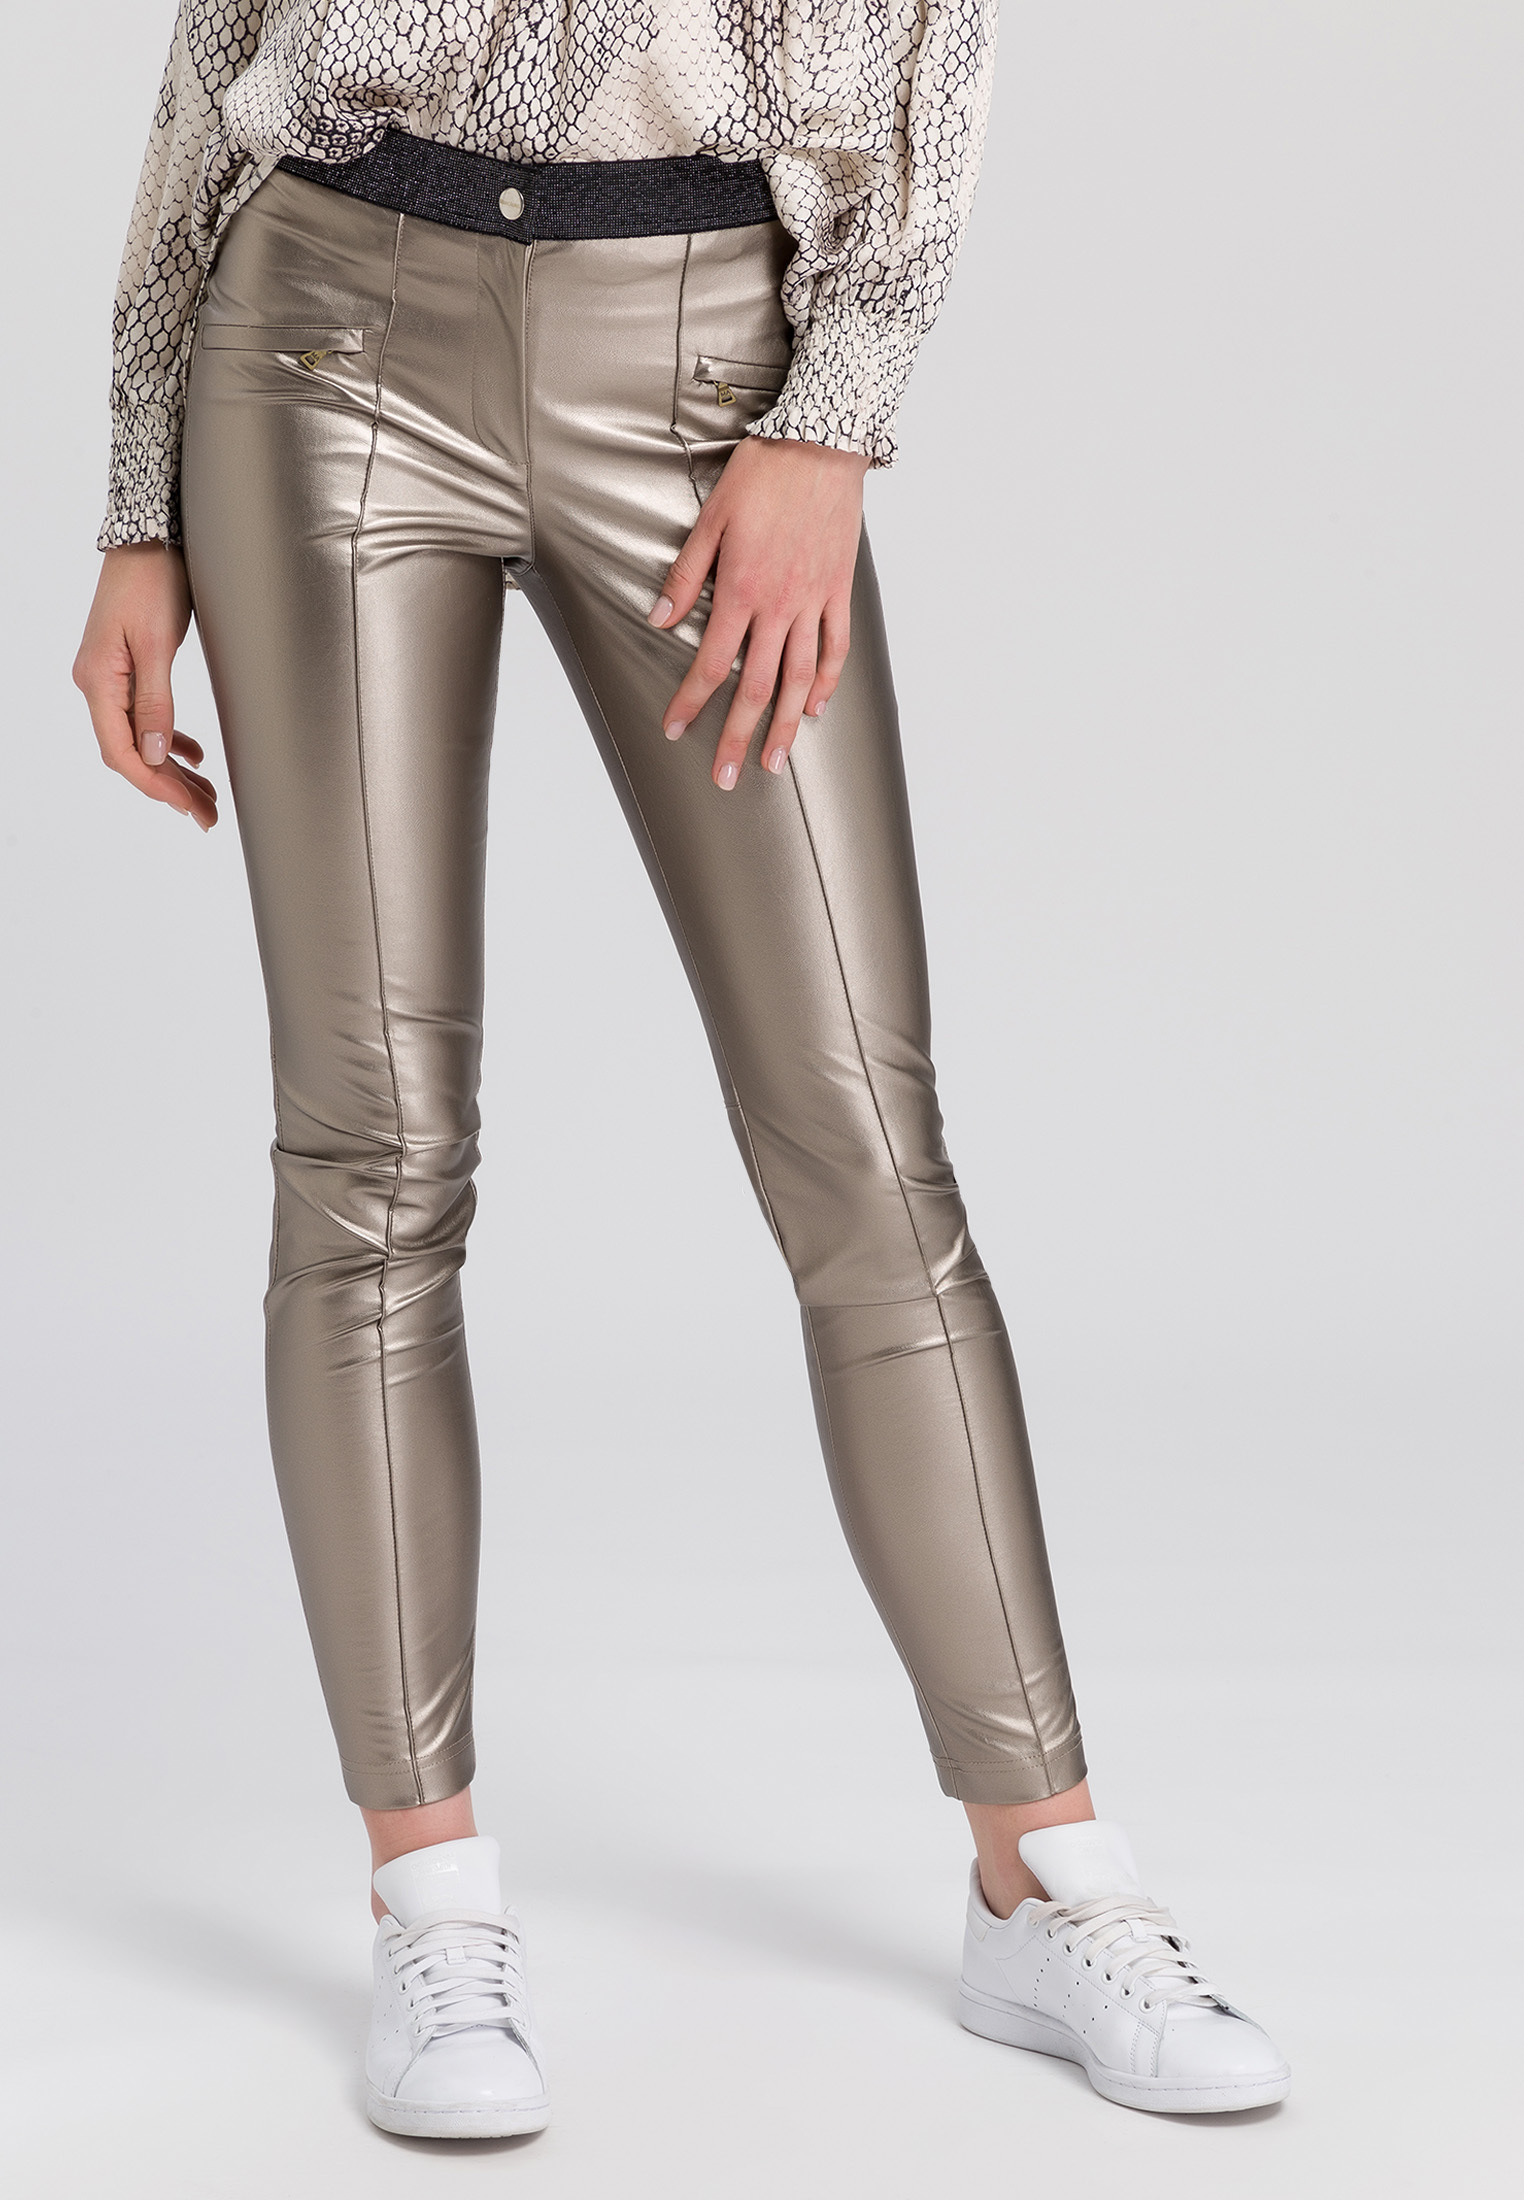 Leggings leather-look | Trousers & Jeans | Fashion